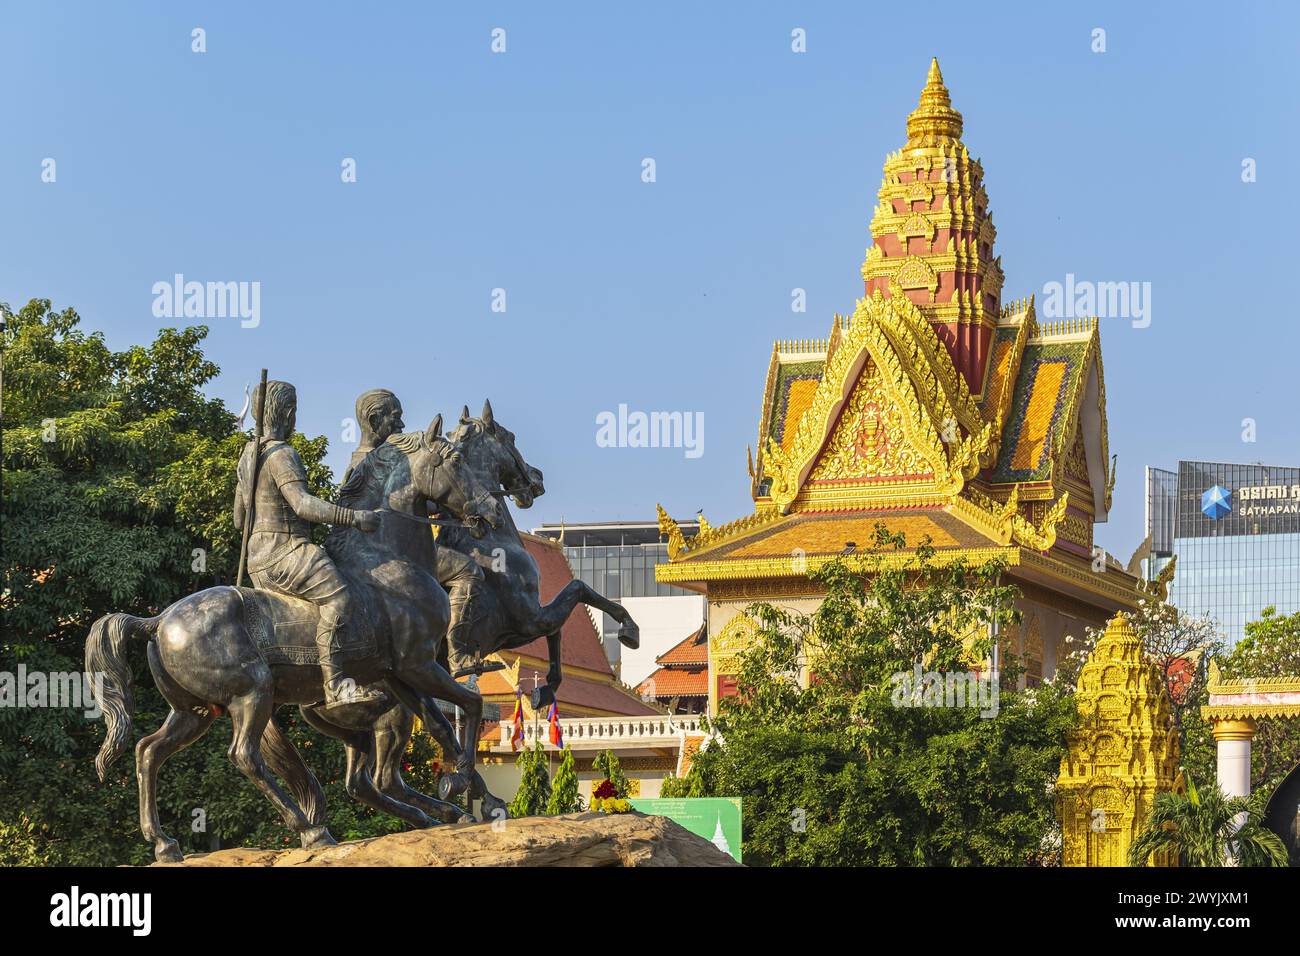 Cambodia, Phnom Penh, Doun Penh district, Monument of the Royal Warriors Decho Meas and Decho Yat in front of Wat Ounalom, Buddhist temple founded in the 15th century Stock Photo